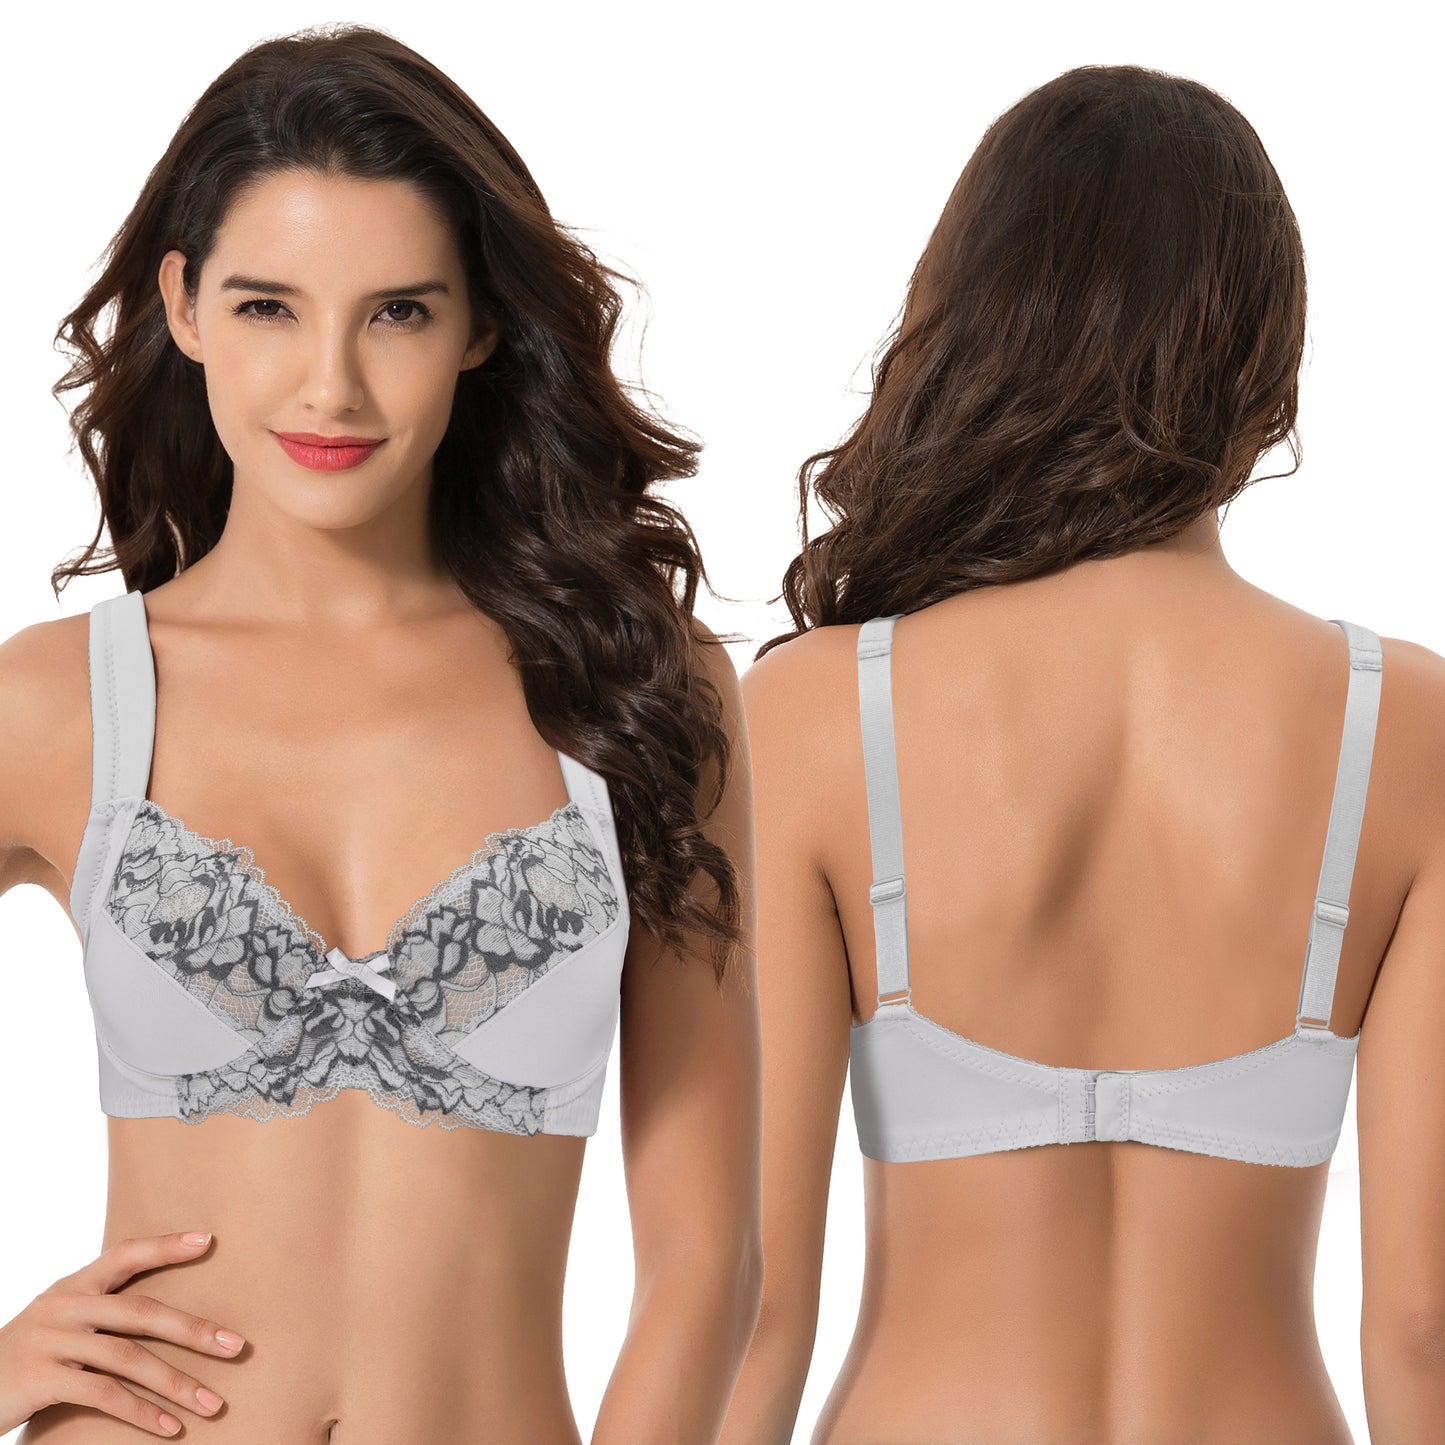 Women's Plus Size Unlined Underwire Lace Bra with Cushion Straps-Light Grey,Navy